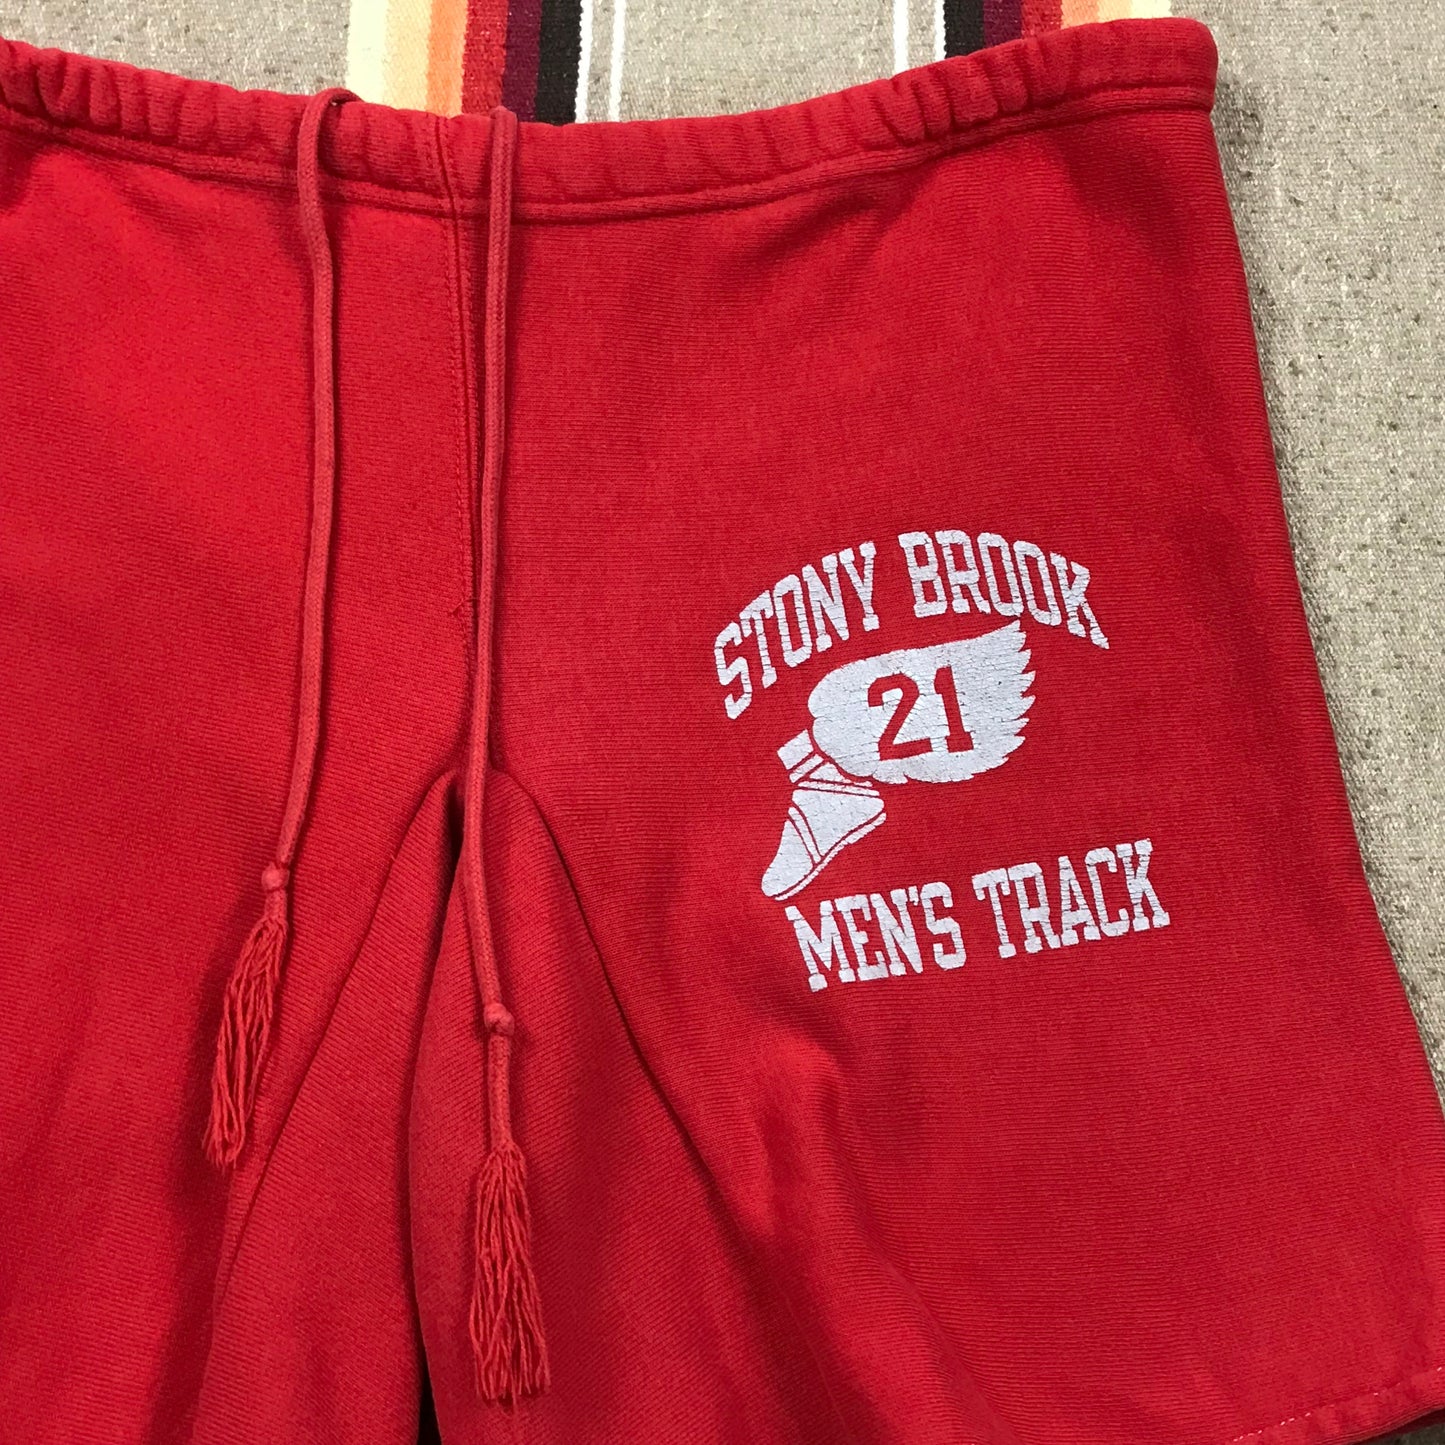 1980s Champion Reverse Weave Shorts Stony Brook Men's Track Made in USA Size 32-35